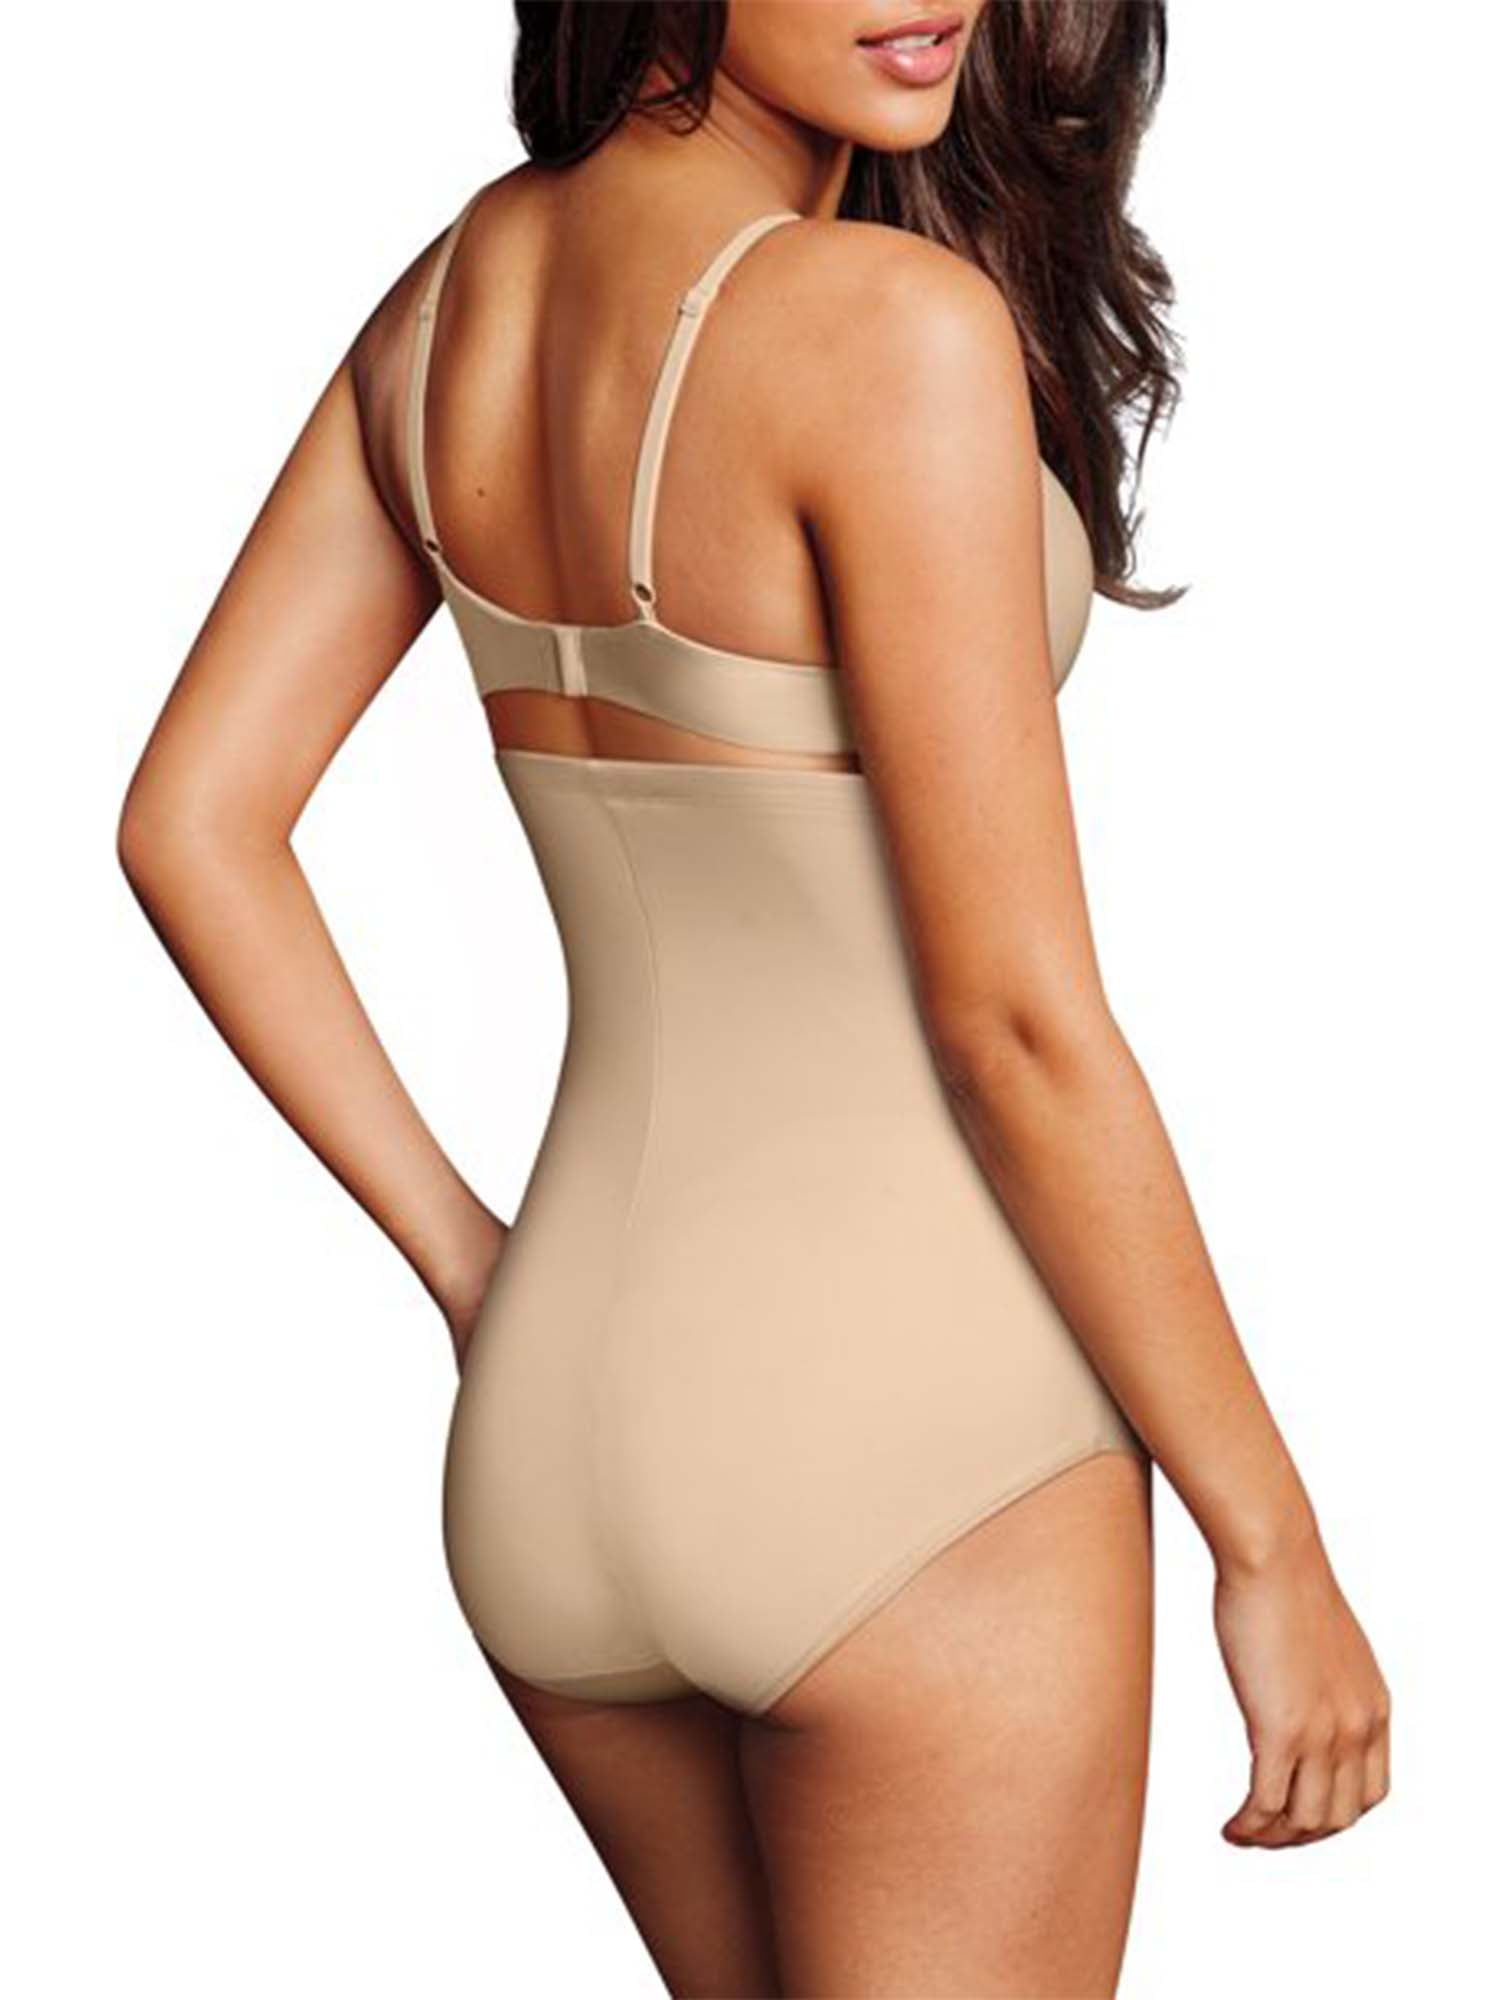 MorningSave: 3-Pack: Maidenform Flexees Smoothing Briefs with Cool Comfort